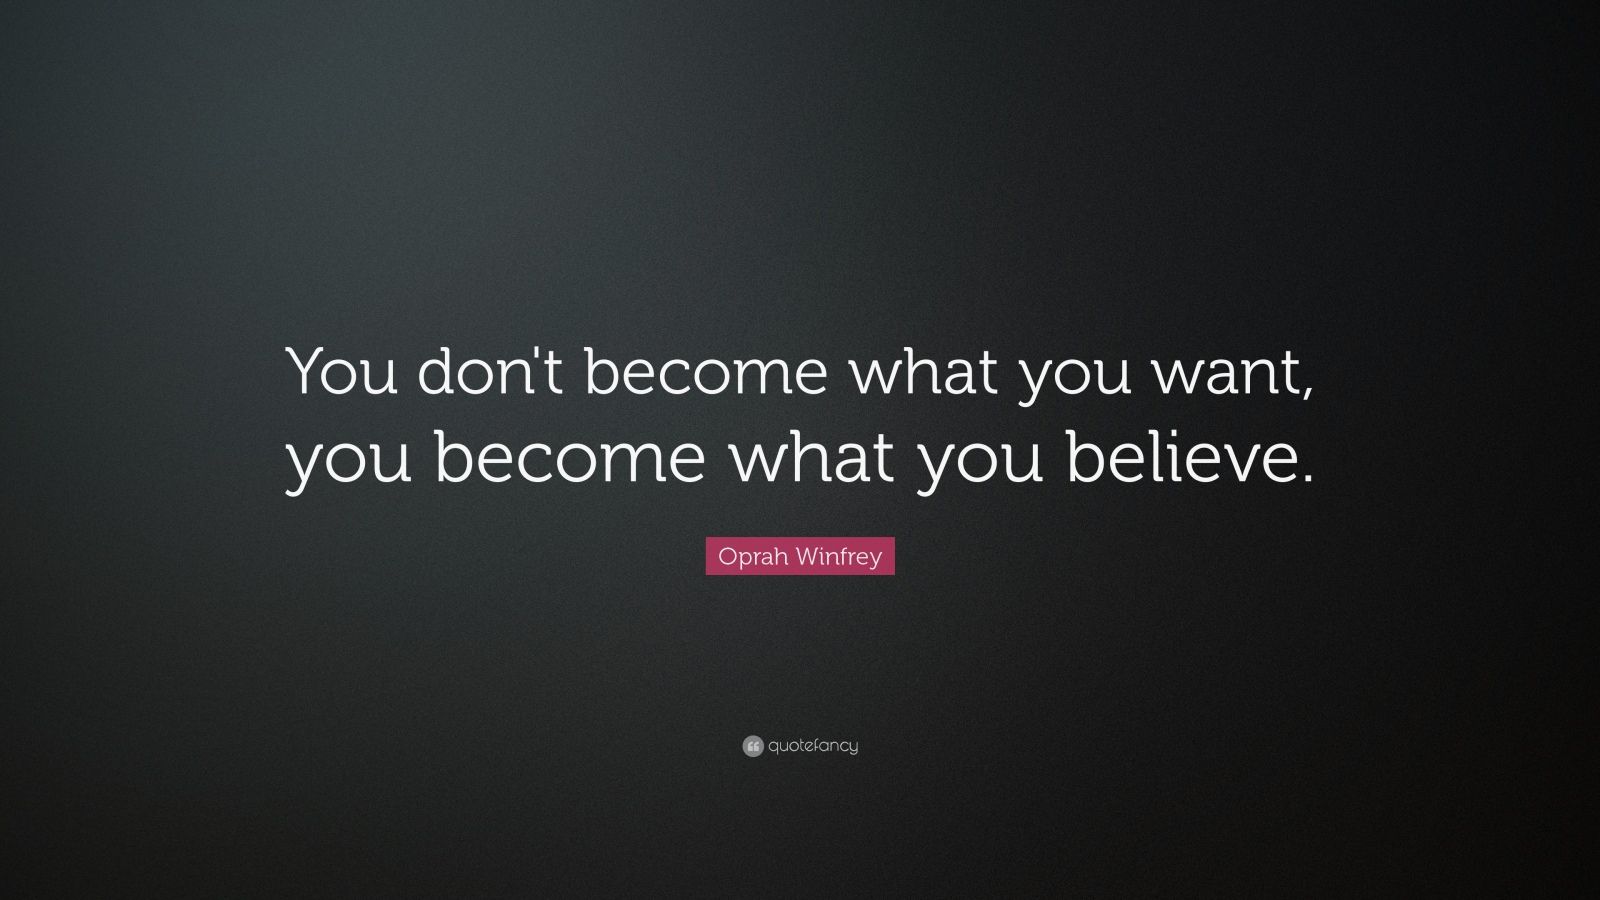 Oprah Winfrey Quote: “You don't become what you want, you become what ...